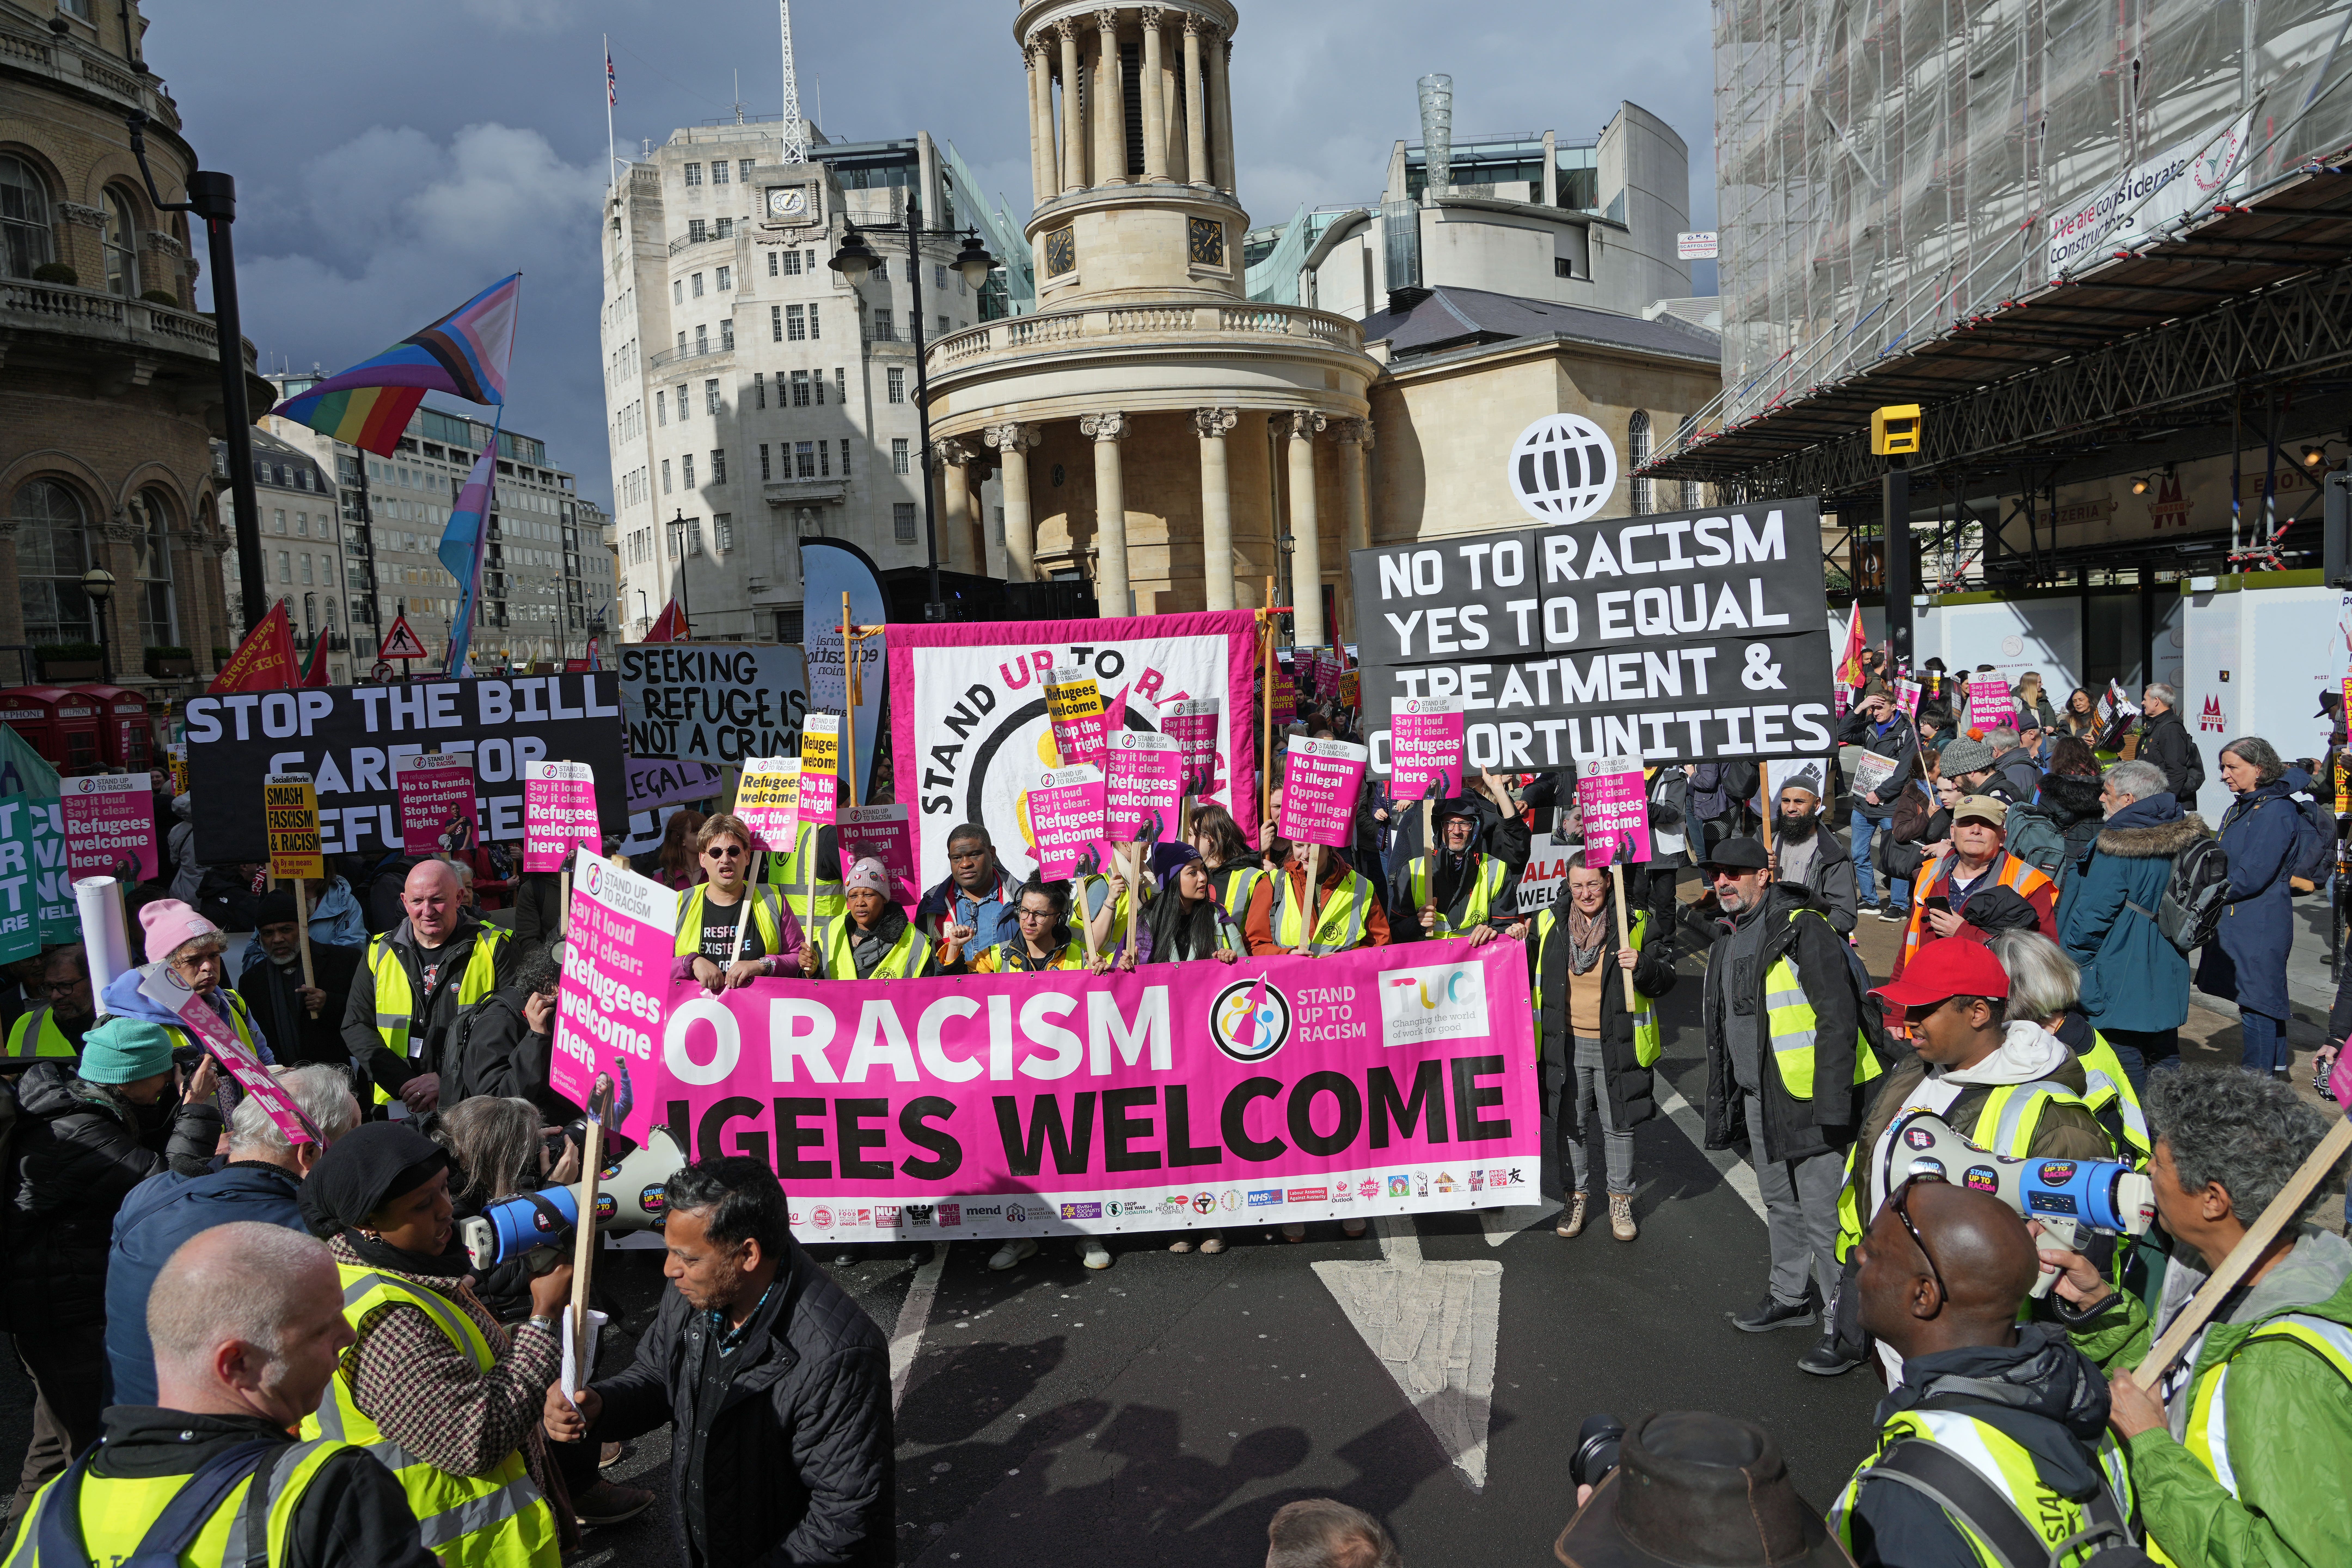 With Ethnic Minority Leaders as Prime Minister, Mayor of London, Scottish First Minister, and Irish Taoiseach, British Leftist Wonders if We’ll Ever See the End of Racist Oppression